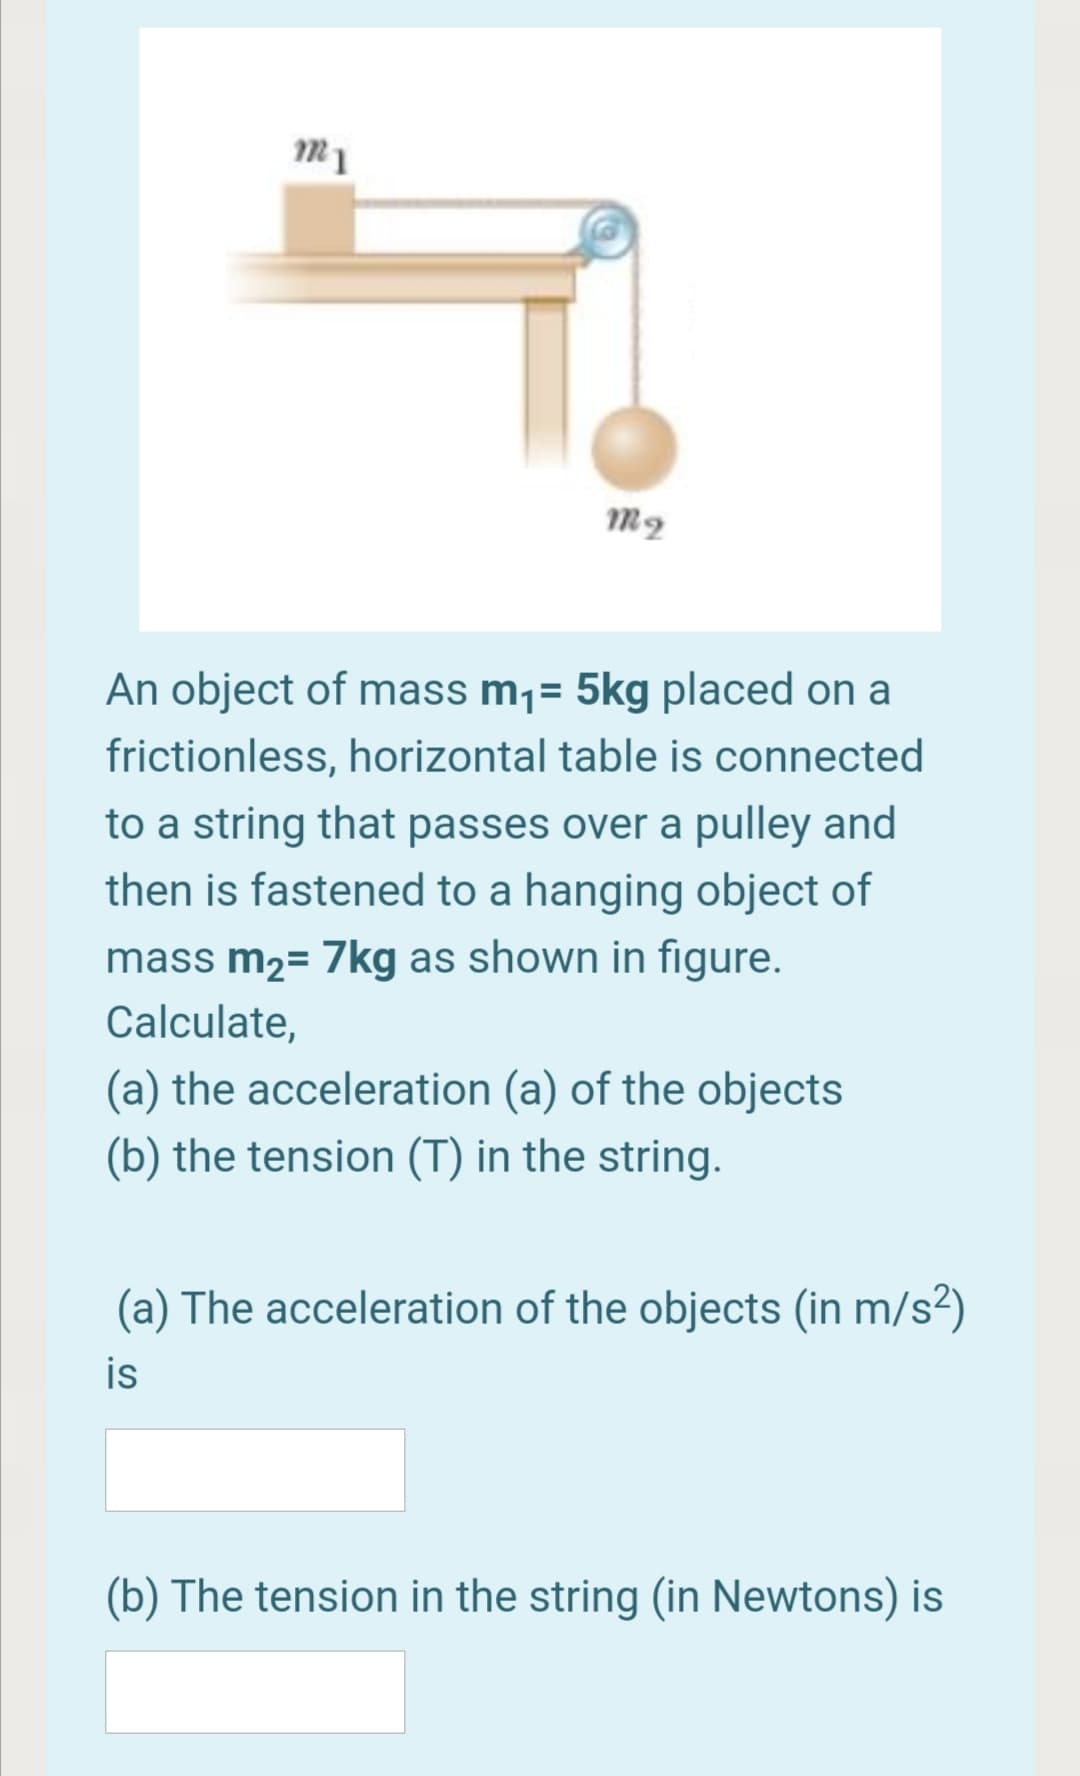 An object of mass m¡= 5kg placed on a
frictionless, horizontal table is connected
to a string that passes over a pulley and
then is fastened to a hanging object of
mass m2= 7kg as shown in figure.
Calculate,
(a) the acceleration (a) of the objects
(b) the tension (T) in the string.
(a) The acceleration of the objects (in m/s²)
is
(b) The tension in the string (in Newtons) is
